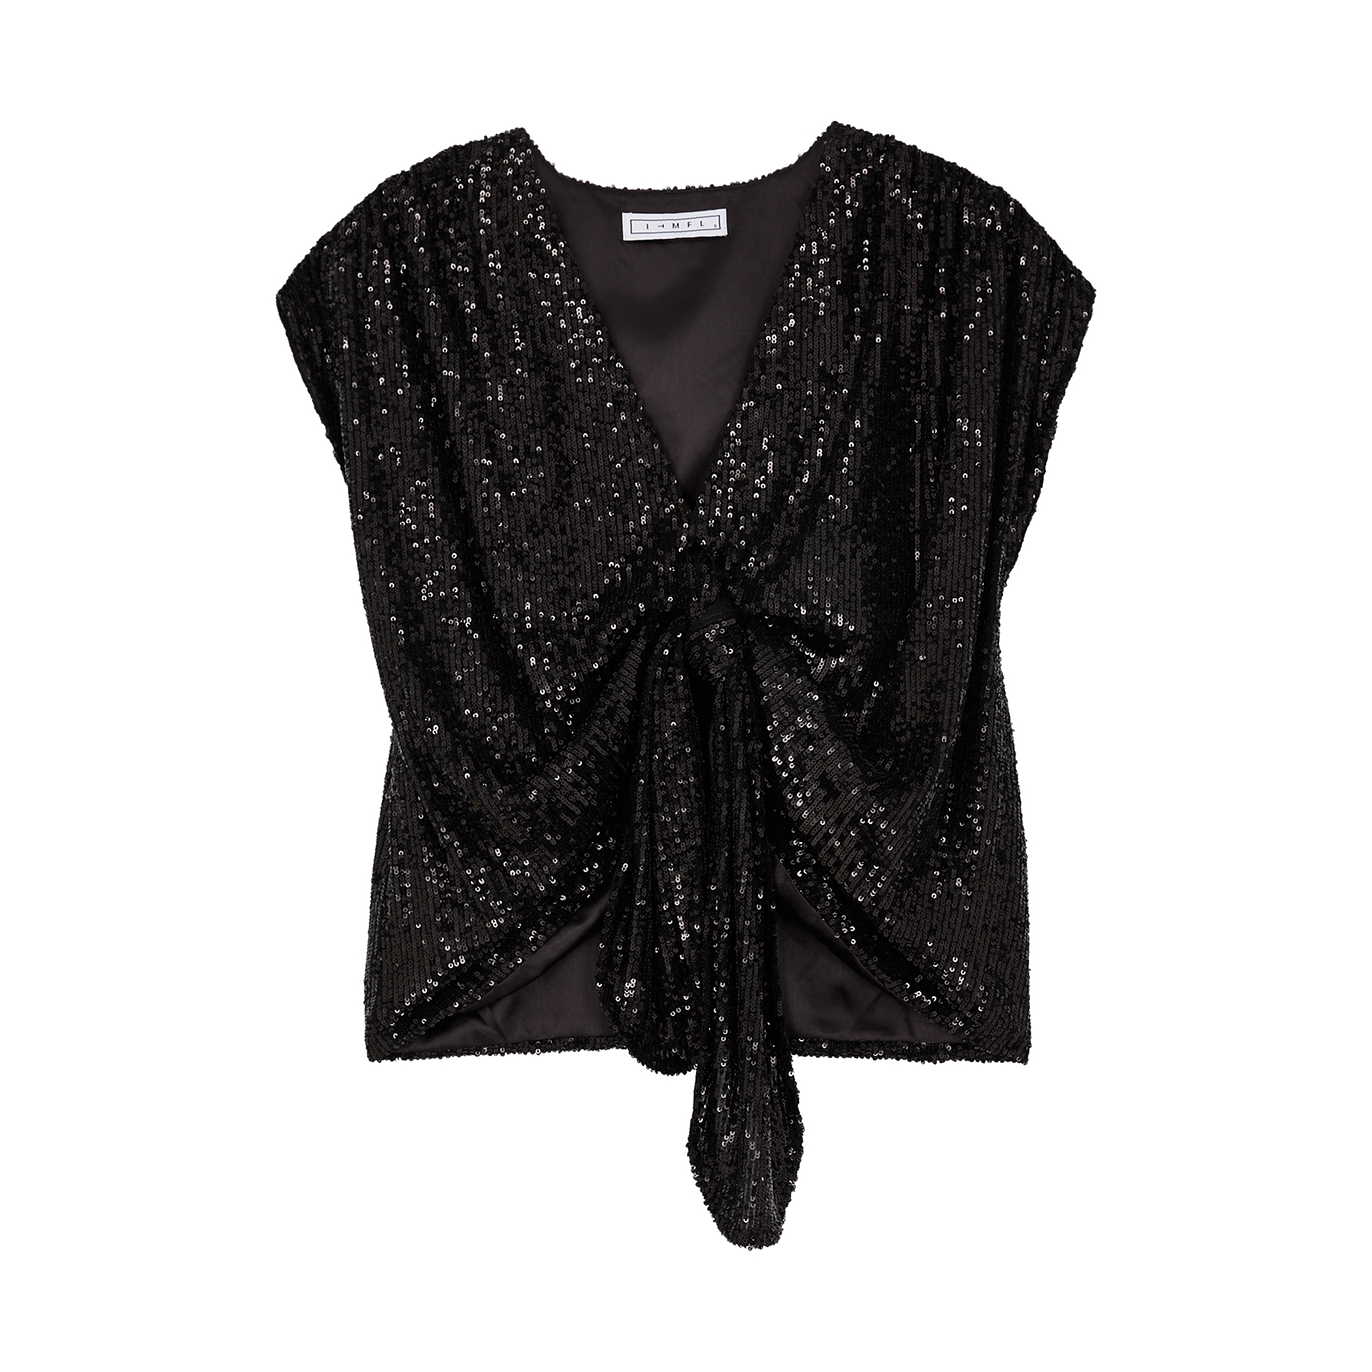 IN The Mood For Love Larissa Black Sequin Top